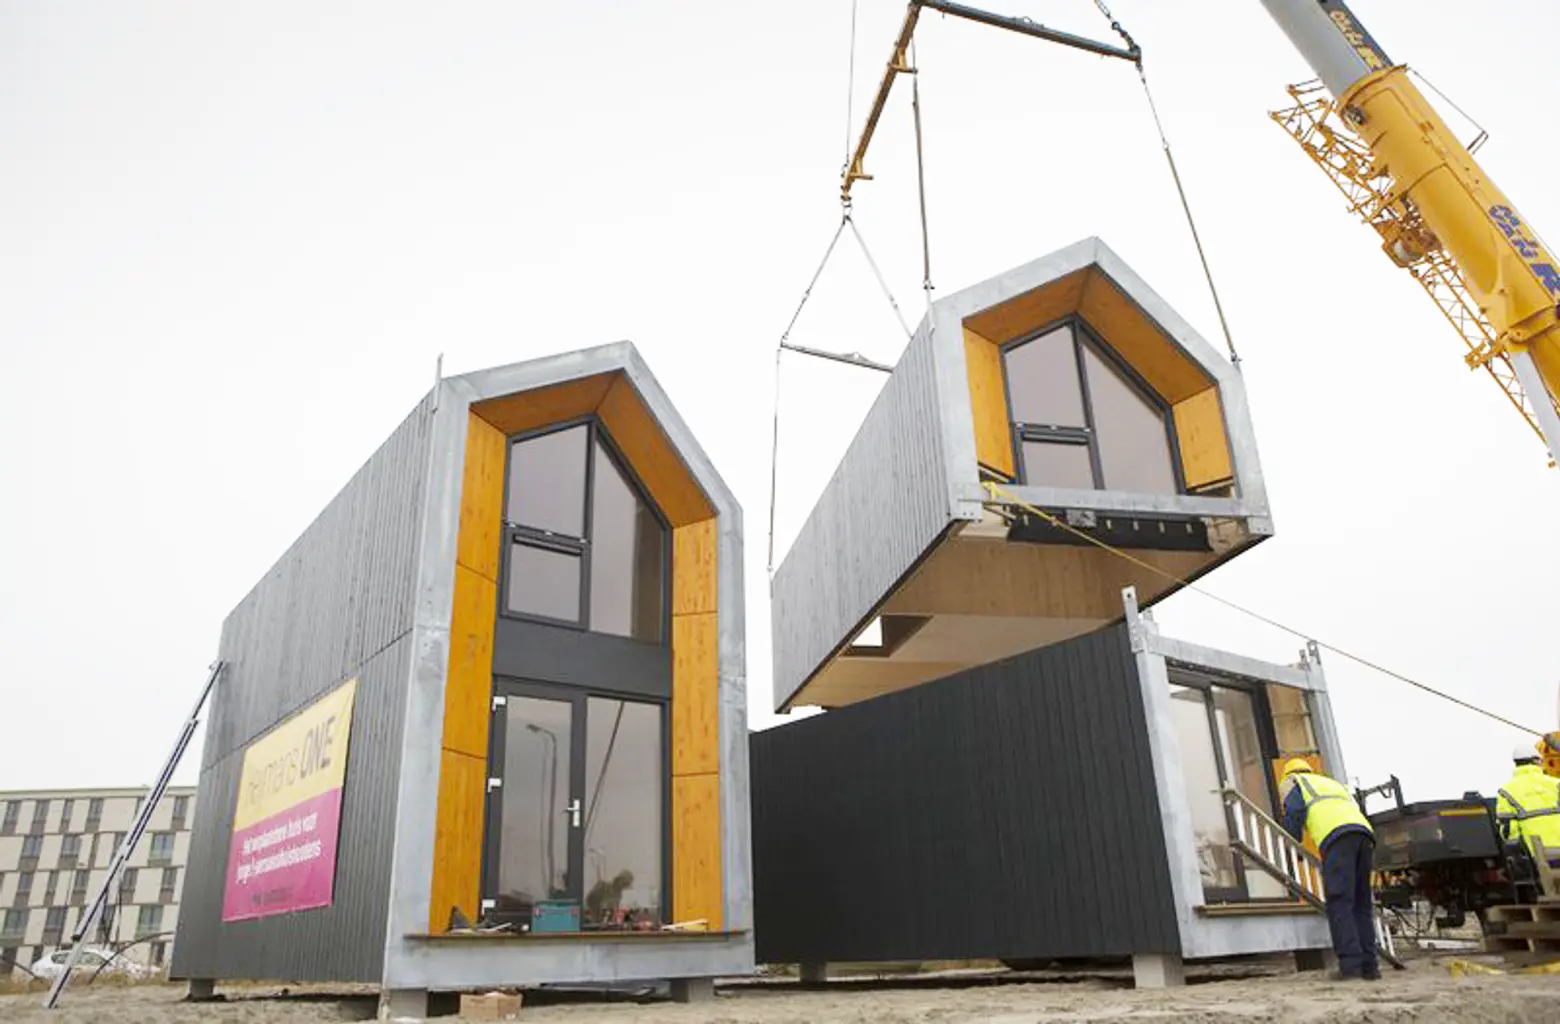 Could These Portable Temporary Homes Help Solve NYC’s Affordable Housing Crisis?